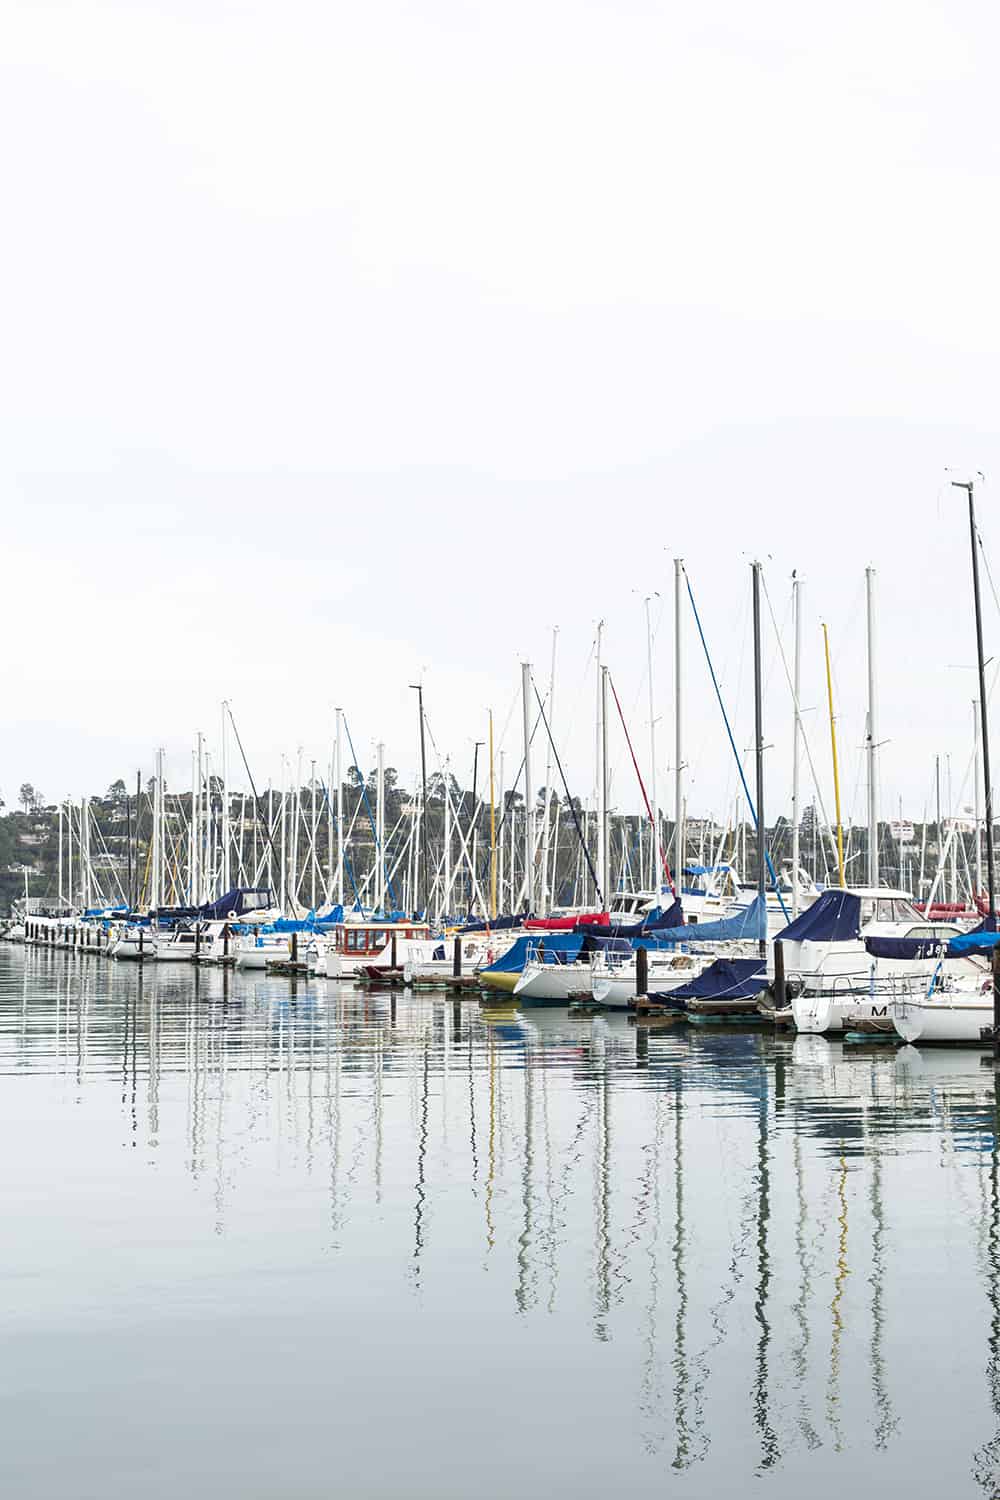 Weekend Getaway To Sausalito From San Francisco